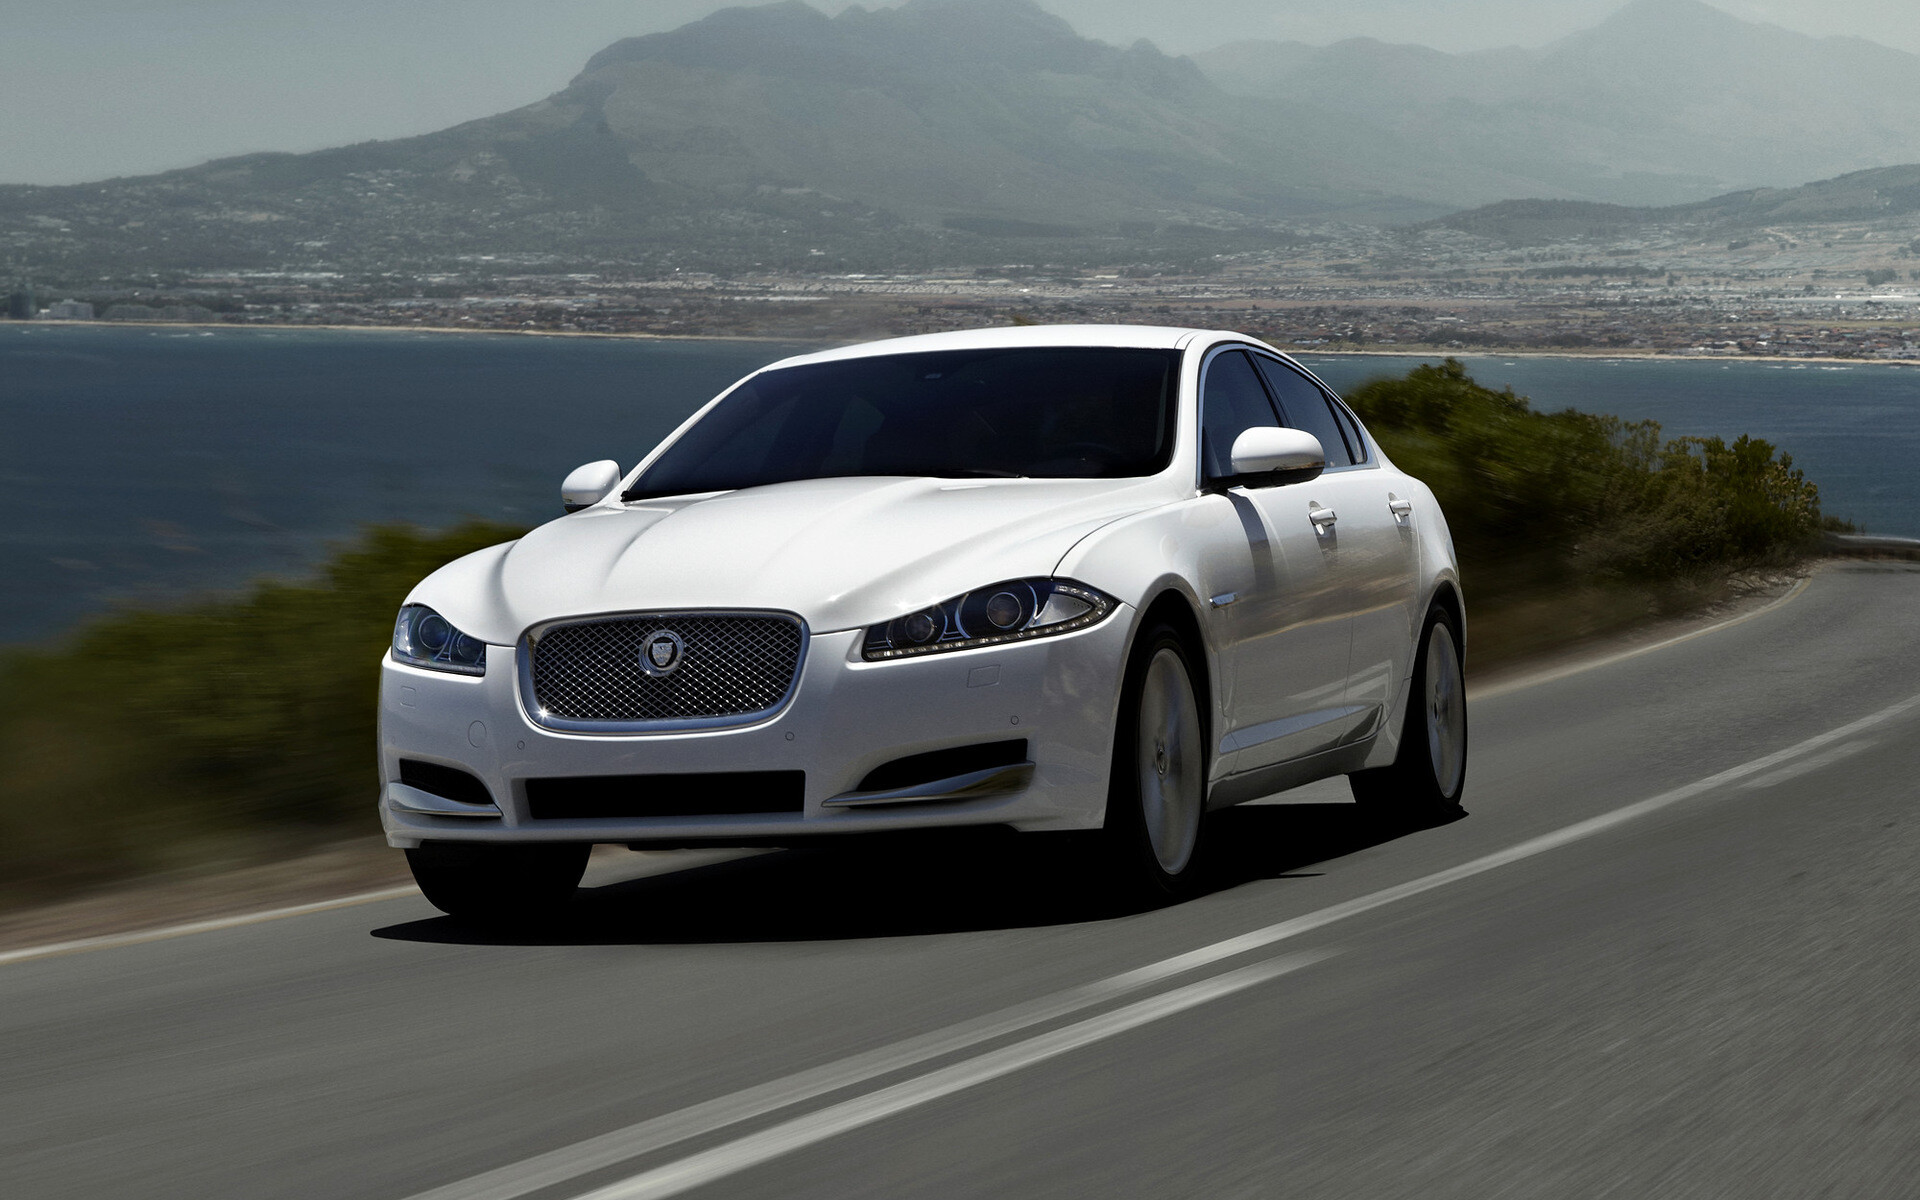 Jaguar Cars: A mid-size executive car introduced in 2008 to replace the S-Type, XF. 1920x1200 HD Wallpaper.